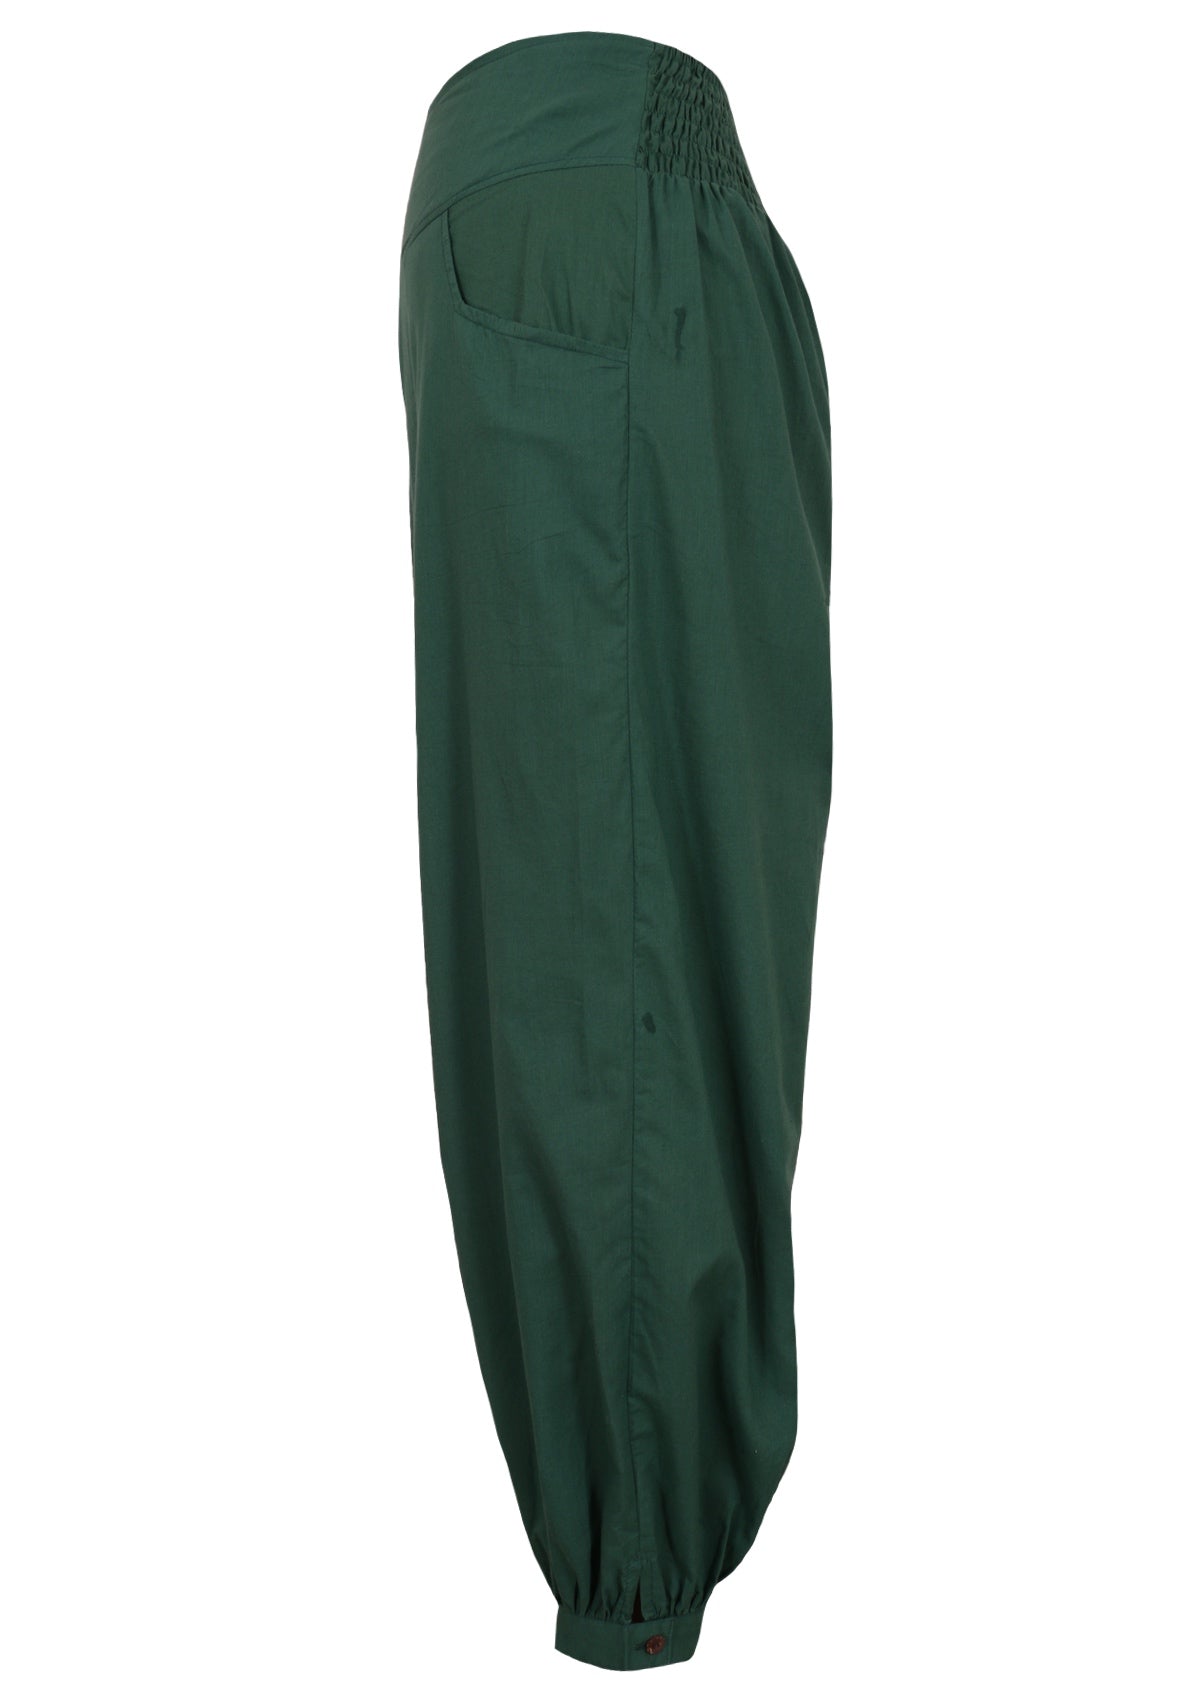 Green cotton pants with buttoned cuffed ankle